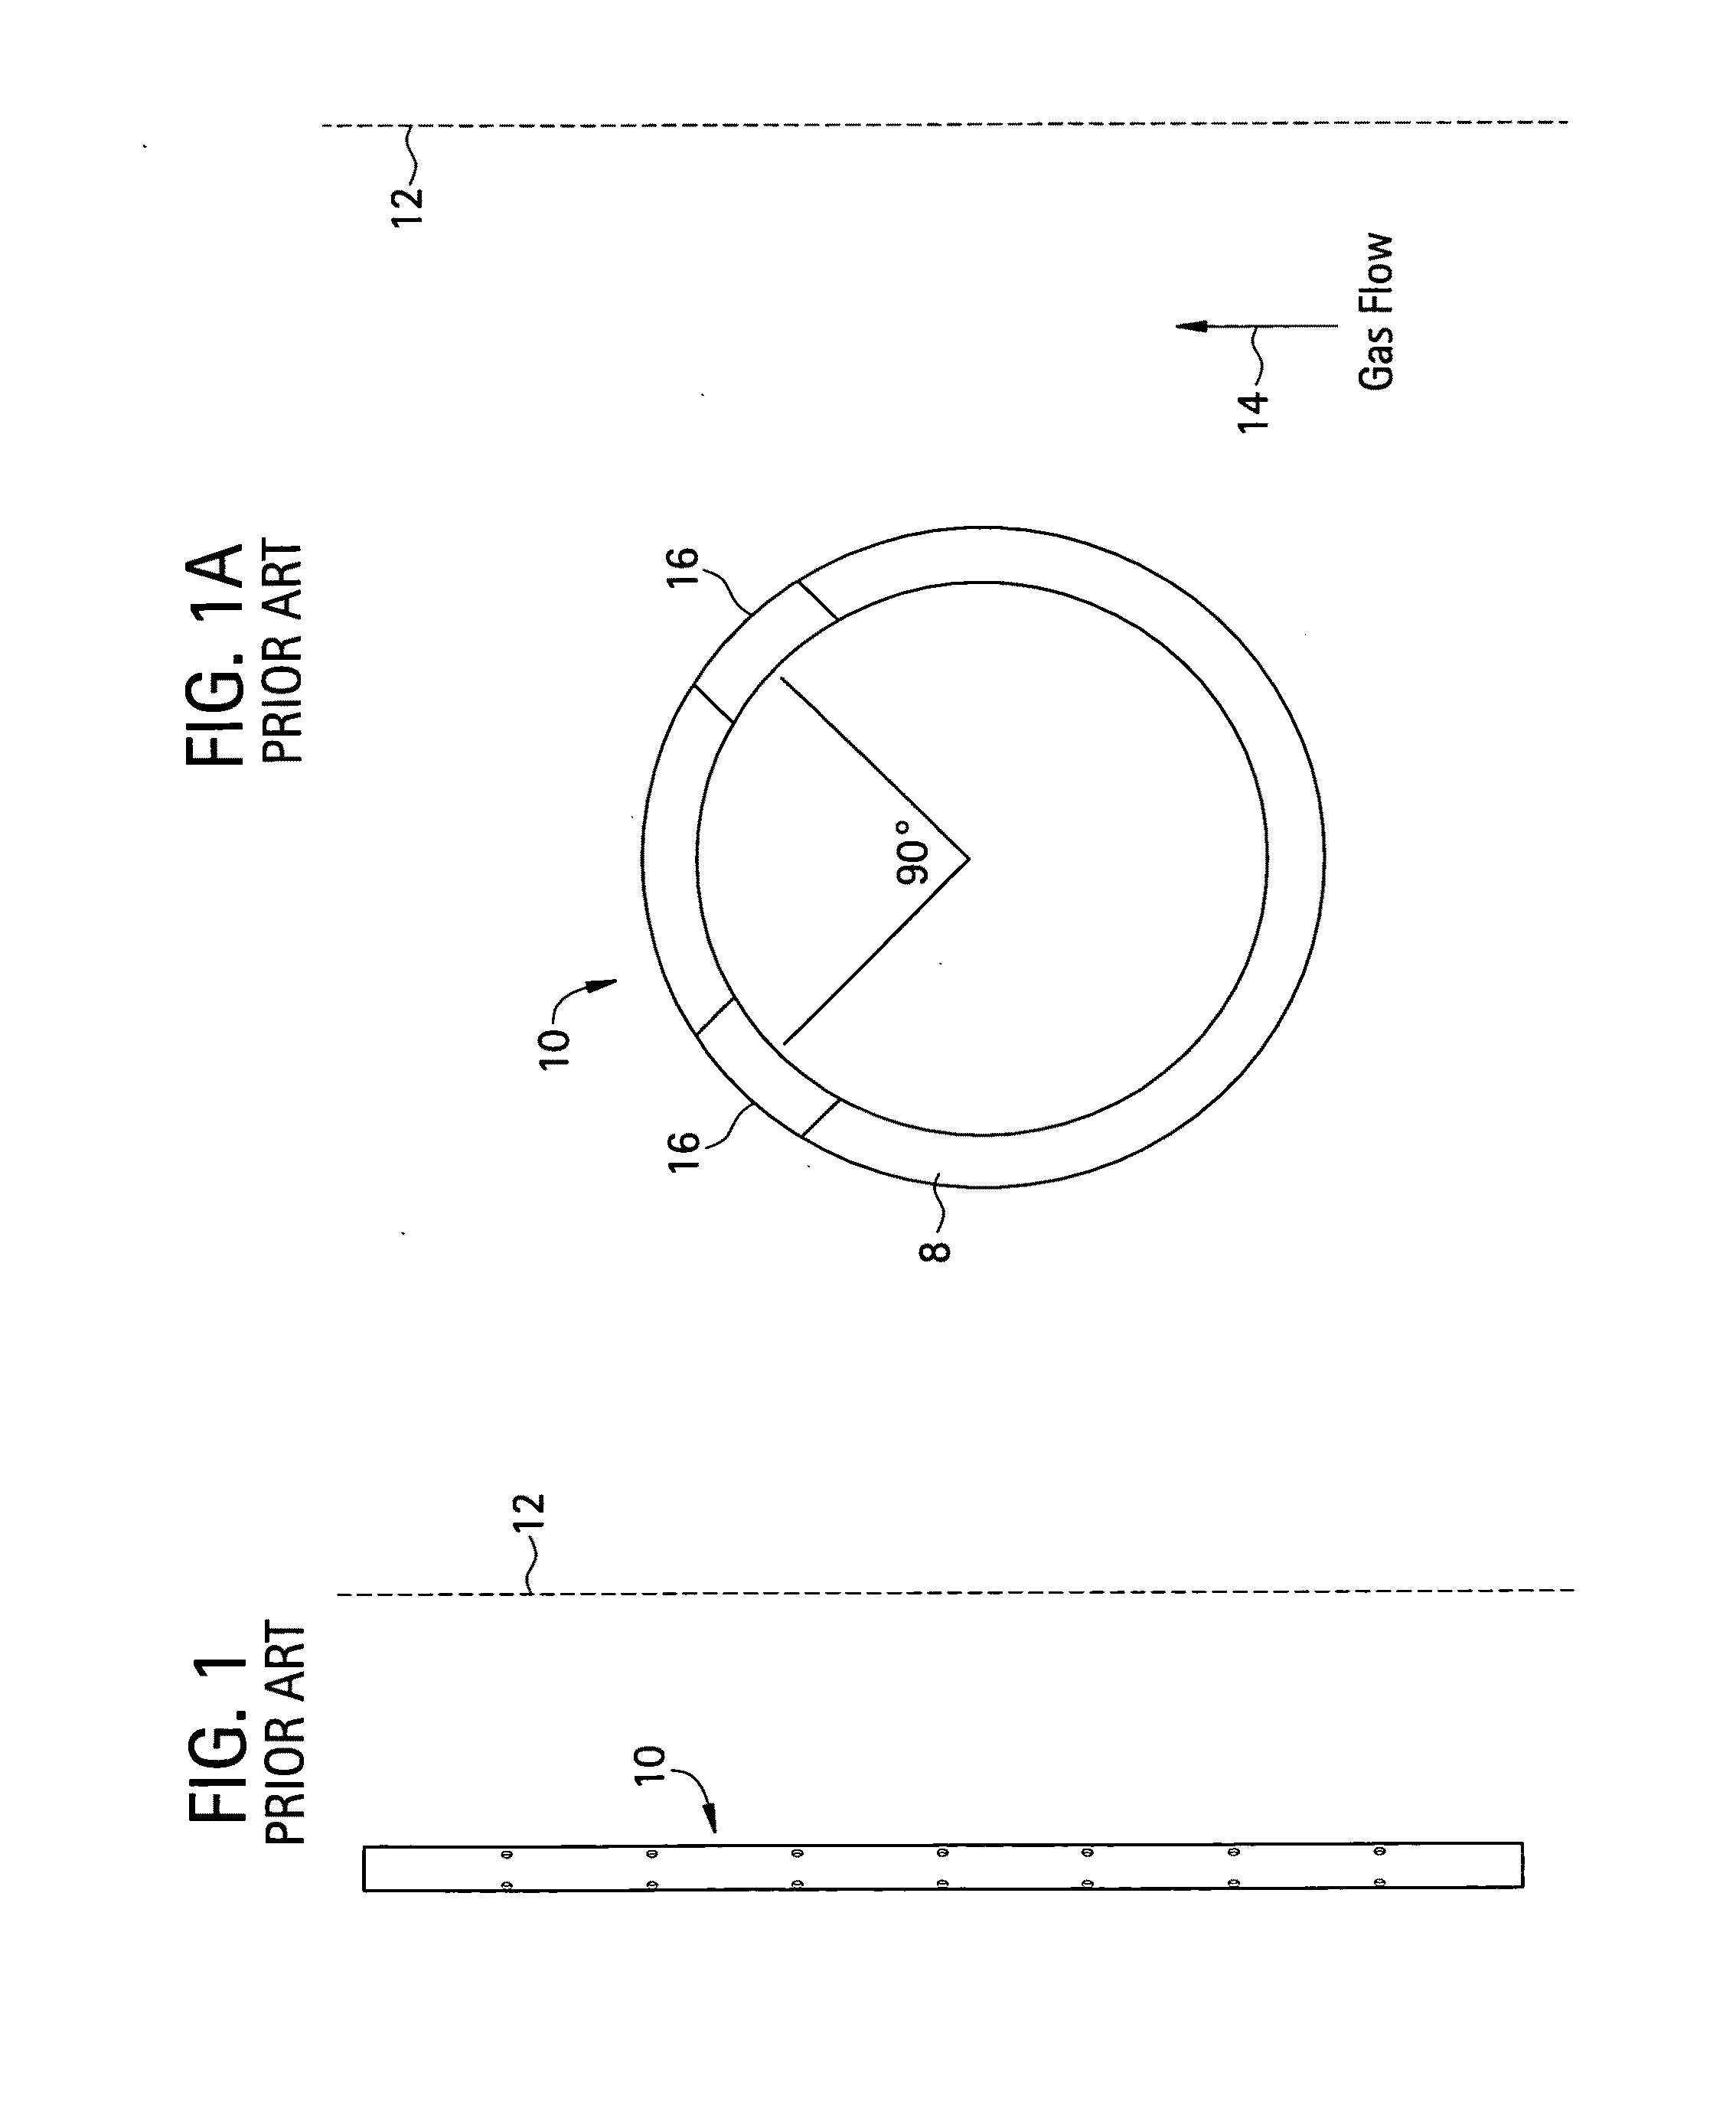 Dispersion lance and shield for dispersing a treating agent into a fluid stream